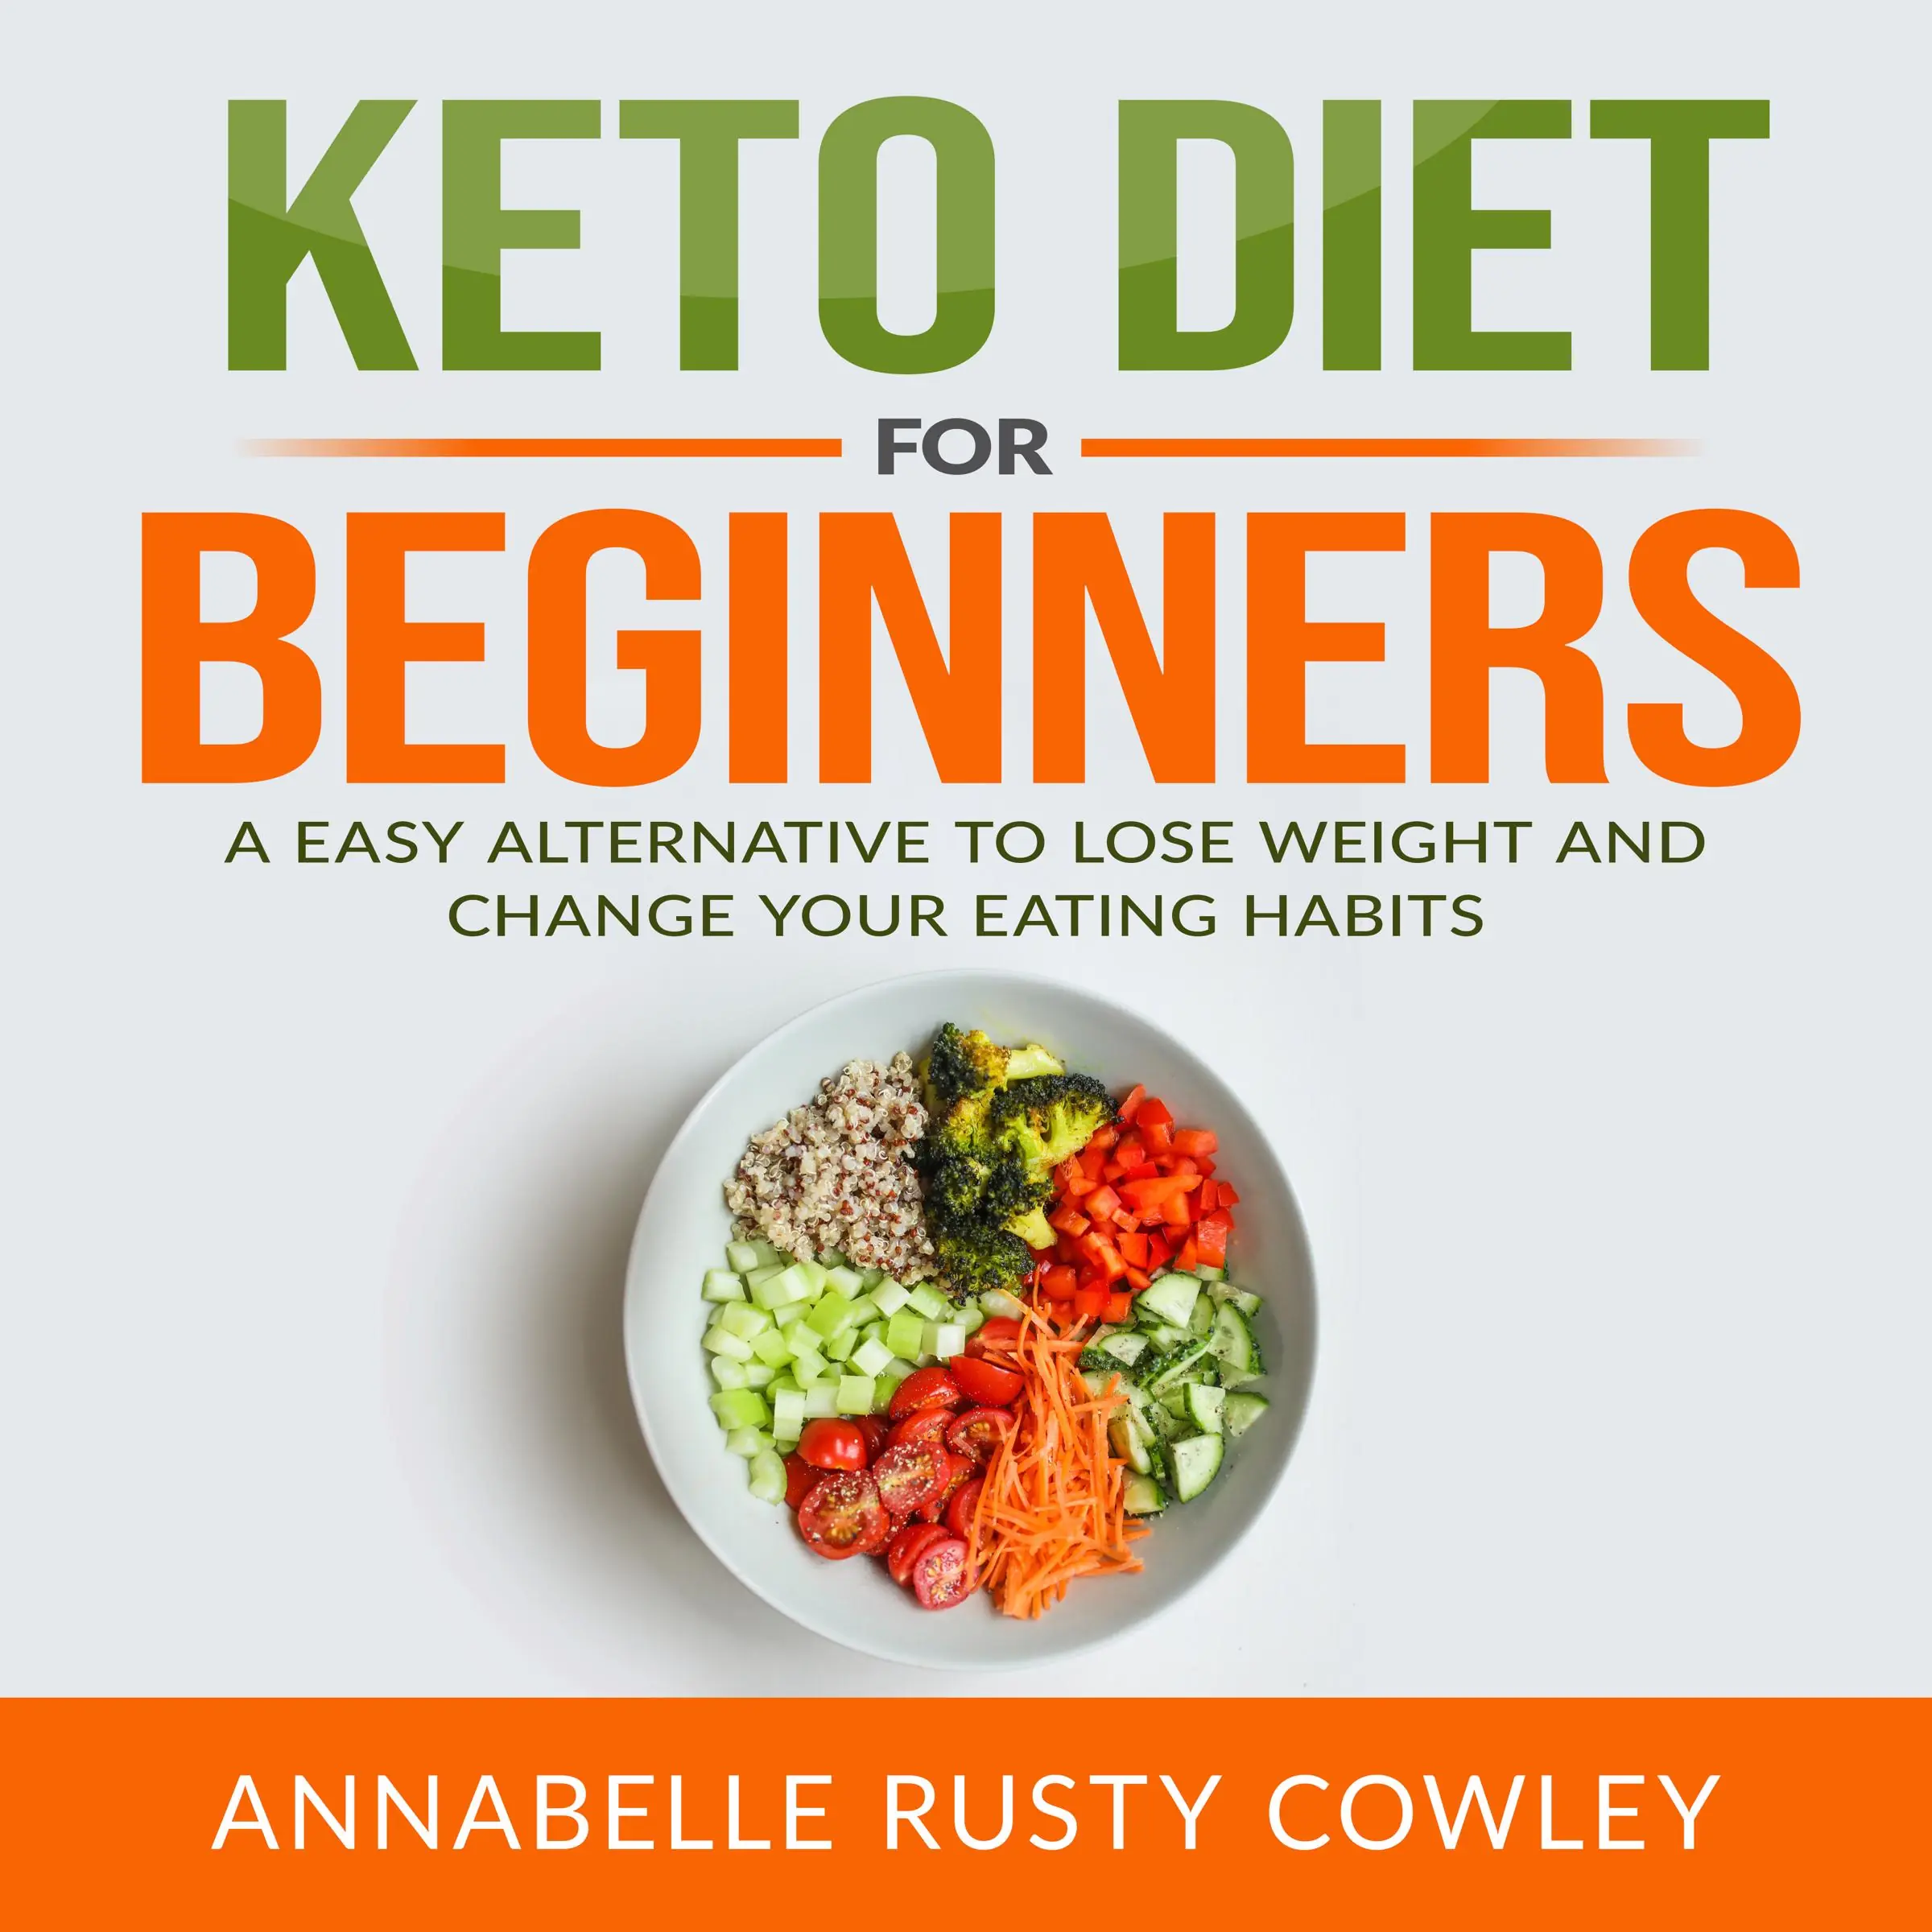 Keto Diet for Beginners: A Easy Alternative to Lose Weight and Change Your Eating Habits Audiobook by Annabelle Rusty Cowley